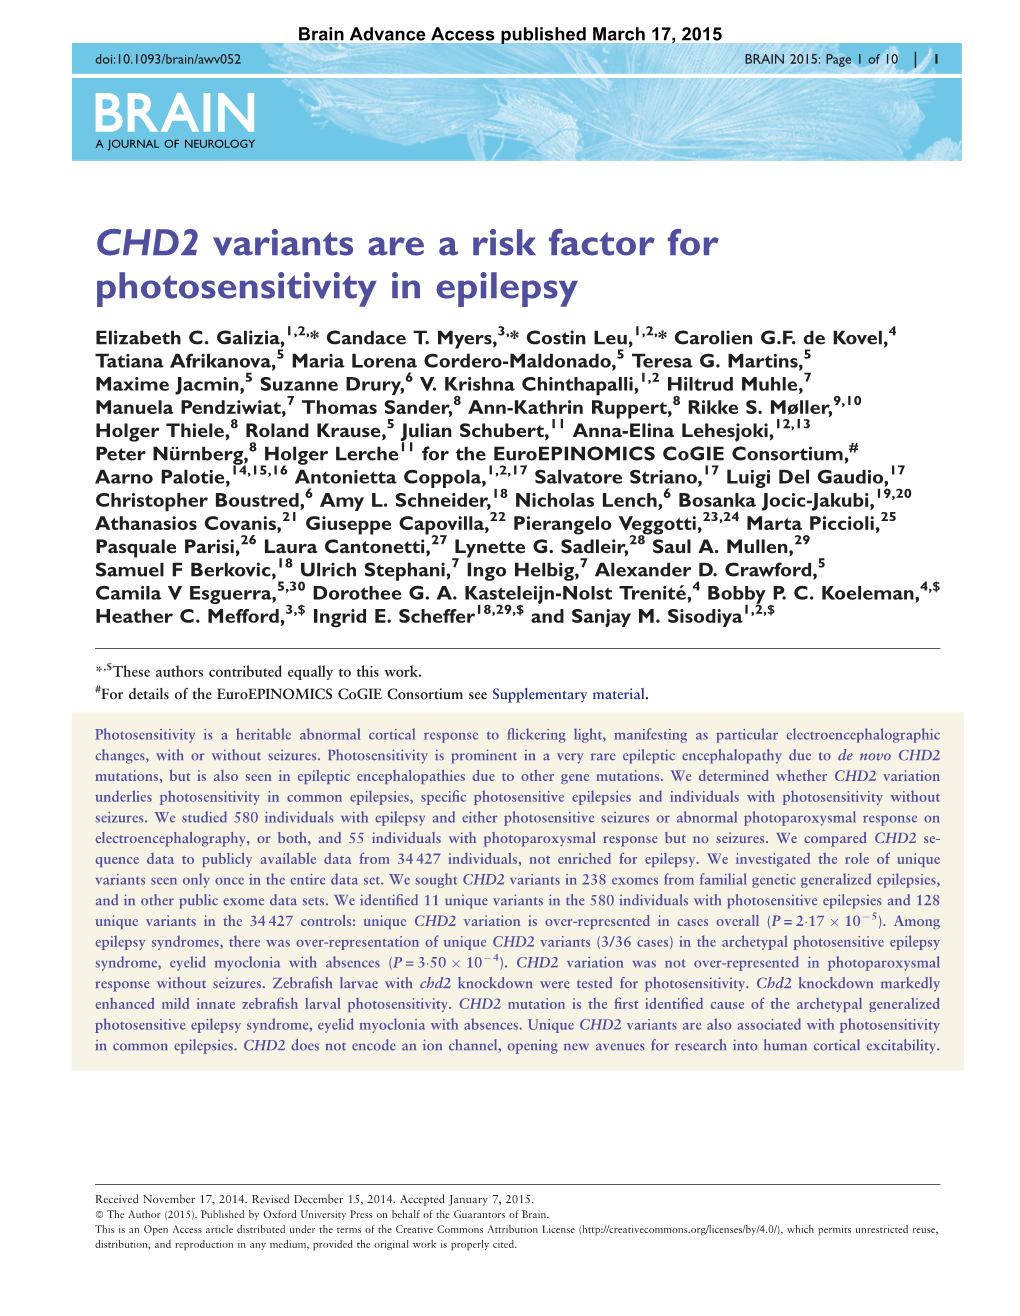 CHD2 Variants Are a Risk Factor for Photosensitivity in Epilepsy